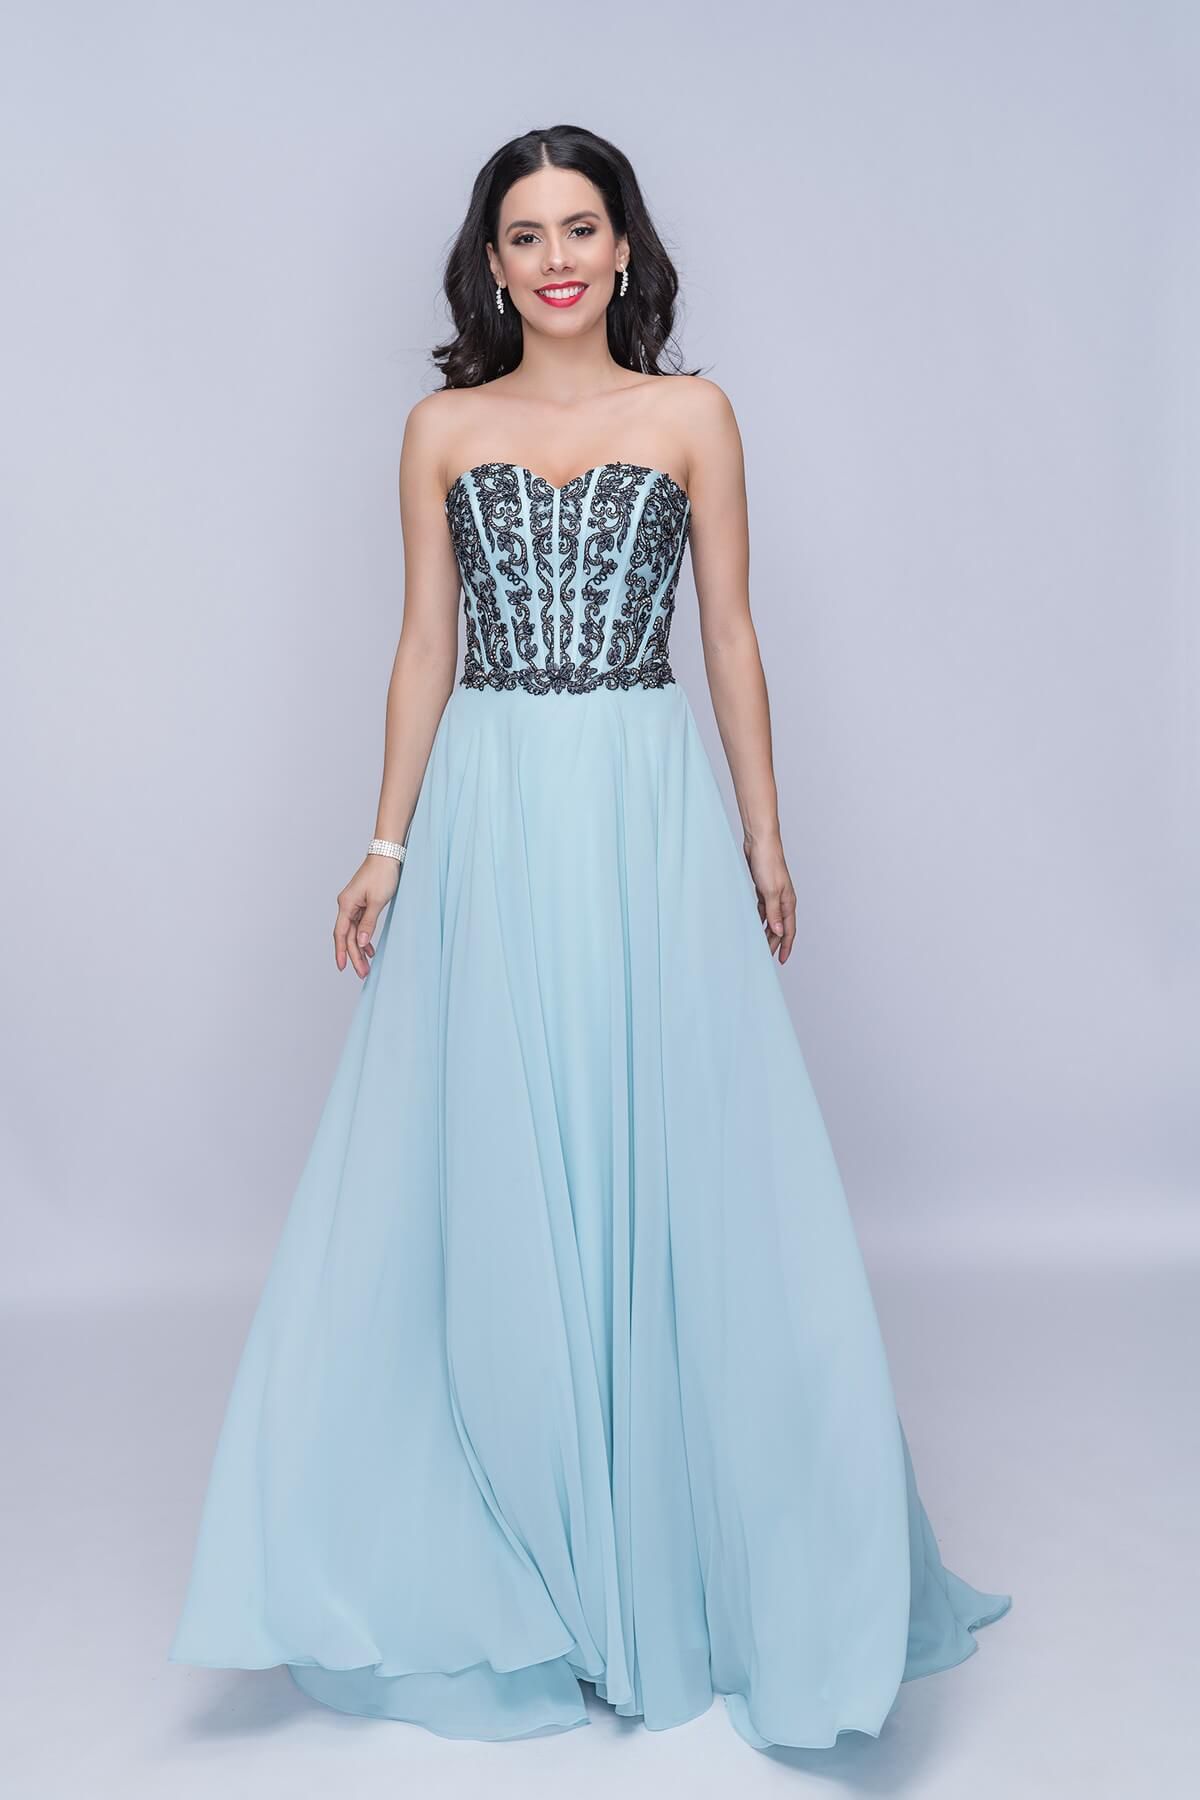 Style 3140 Nina Canacci Size 6 Prom Strapless Light Blue A-line Dress on Queenly